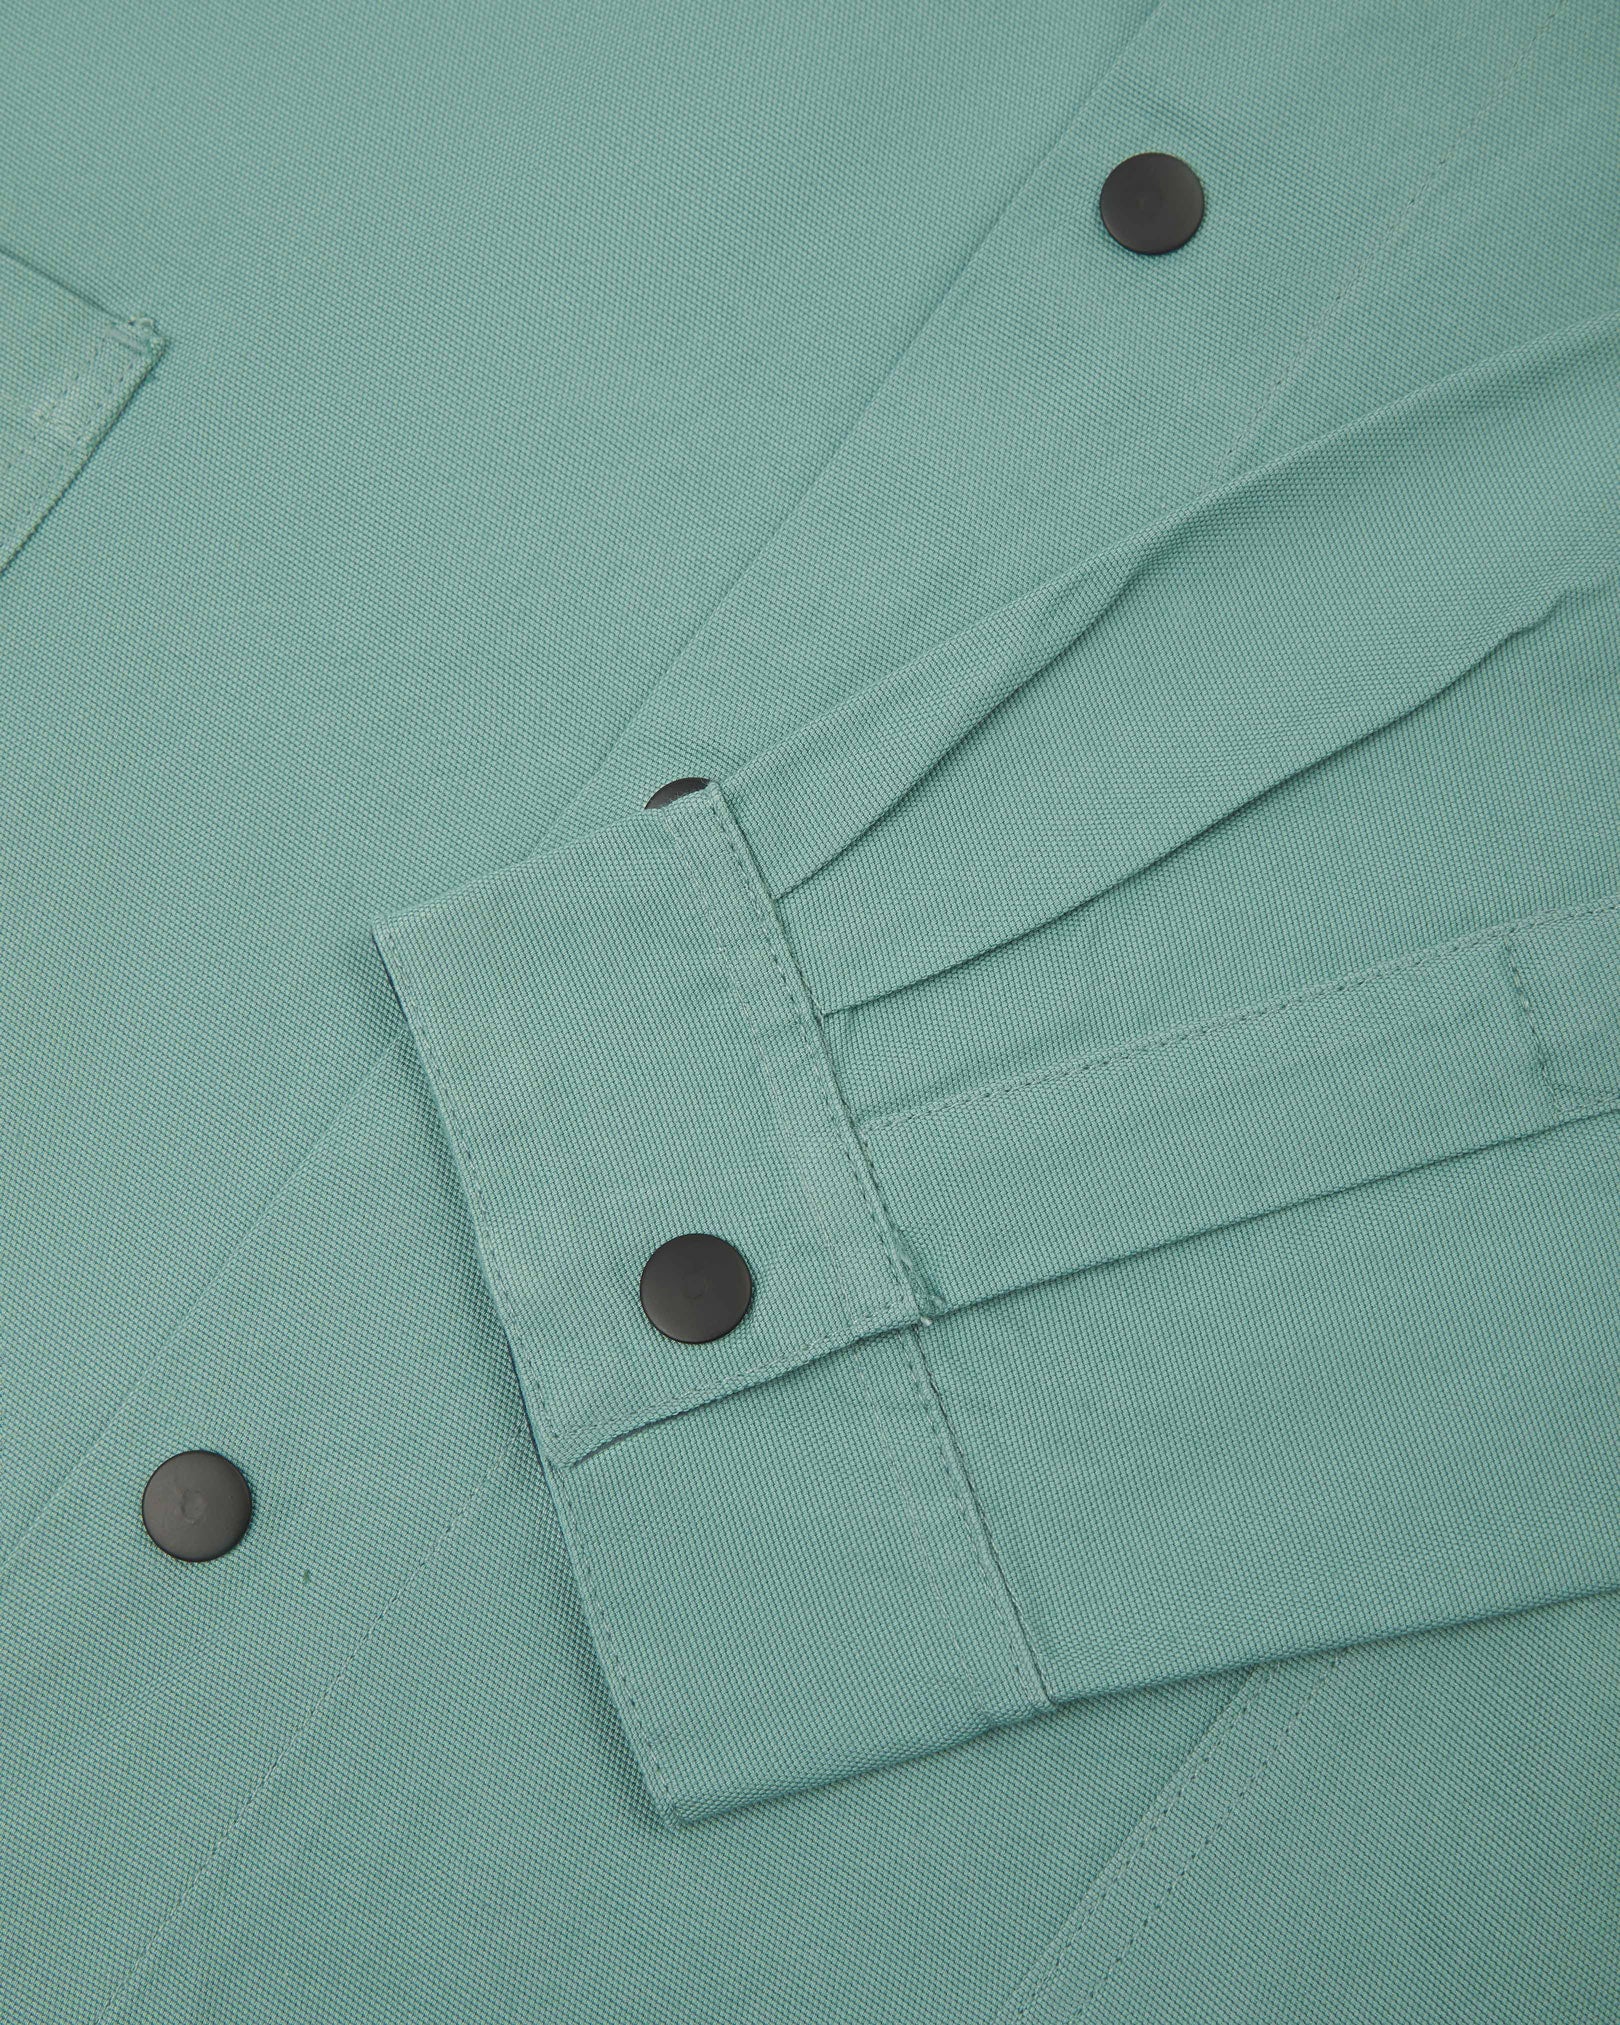 Sleeve view of Uskees 3013 eucalyptus-green organic cotton coach jacket with focus on placket, cuff and popper buttons.